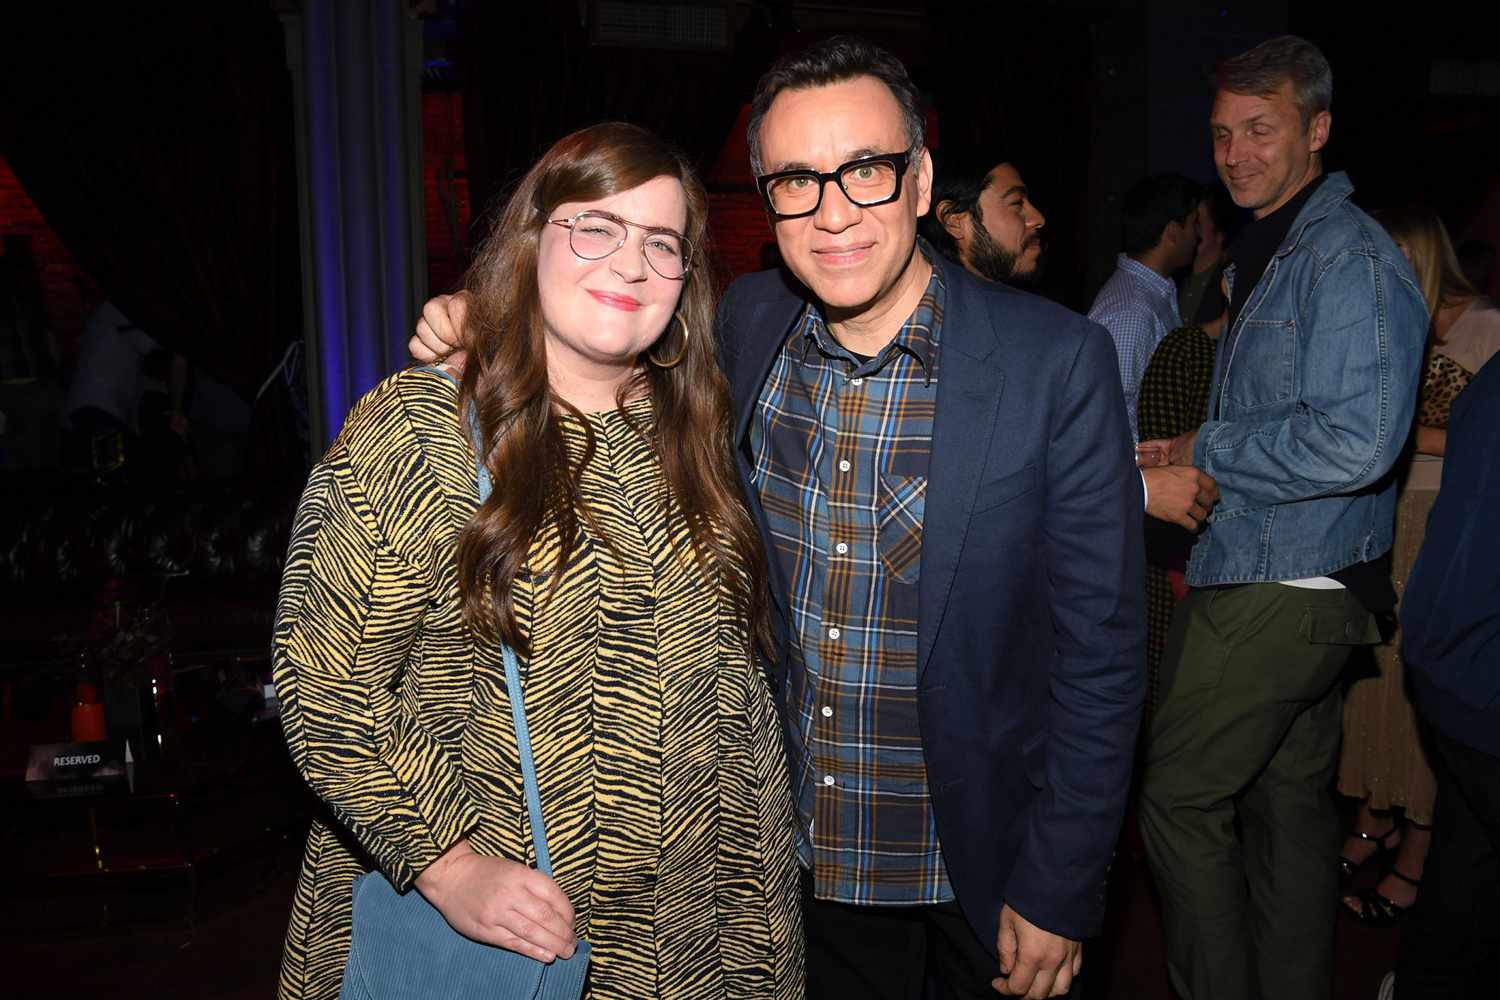 Aidy Bryant and Fred Armisen